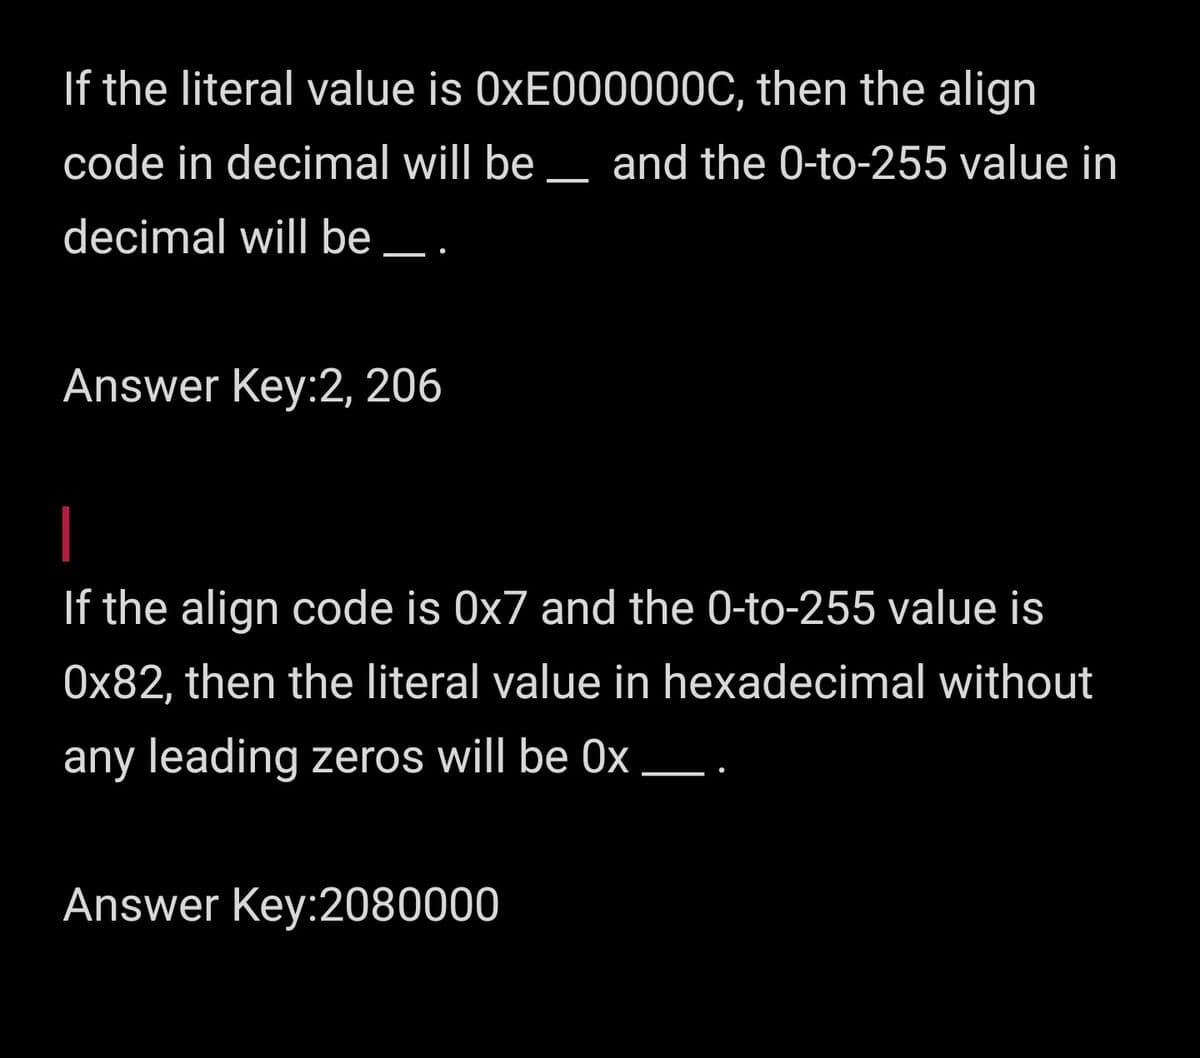 If the literal value is 0XE000000C, then the align
code in decimal will be _ and the 0-to-255 value in
decimal will be _.
Answer Key:2, 206
If the align code is 0x7 and the 0-to-255 value is
0x82, then the literal value in hexadecimal without
any leading zeros will be 0x _.
Answer Key:2080000
